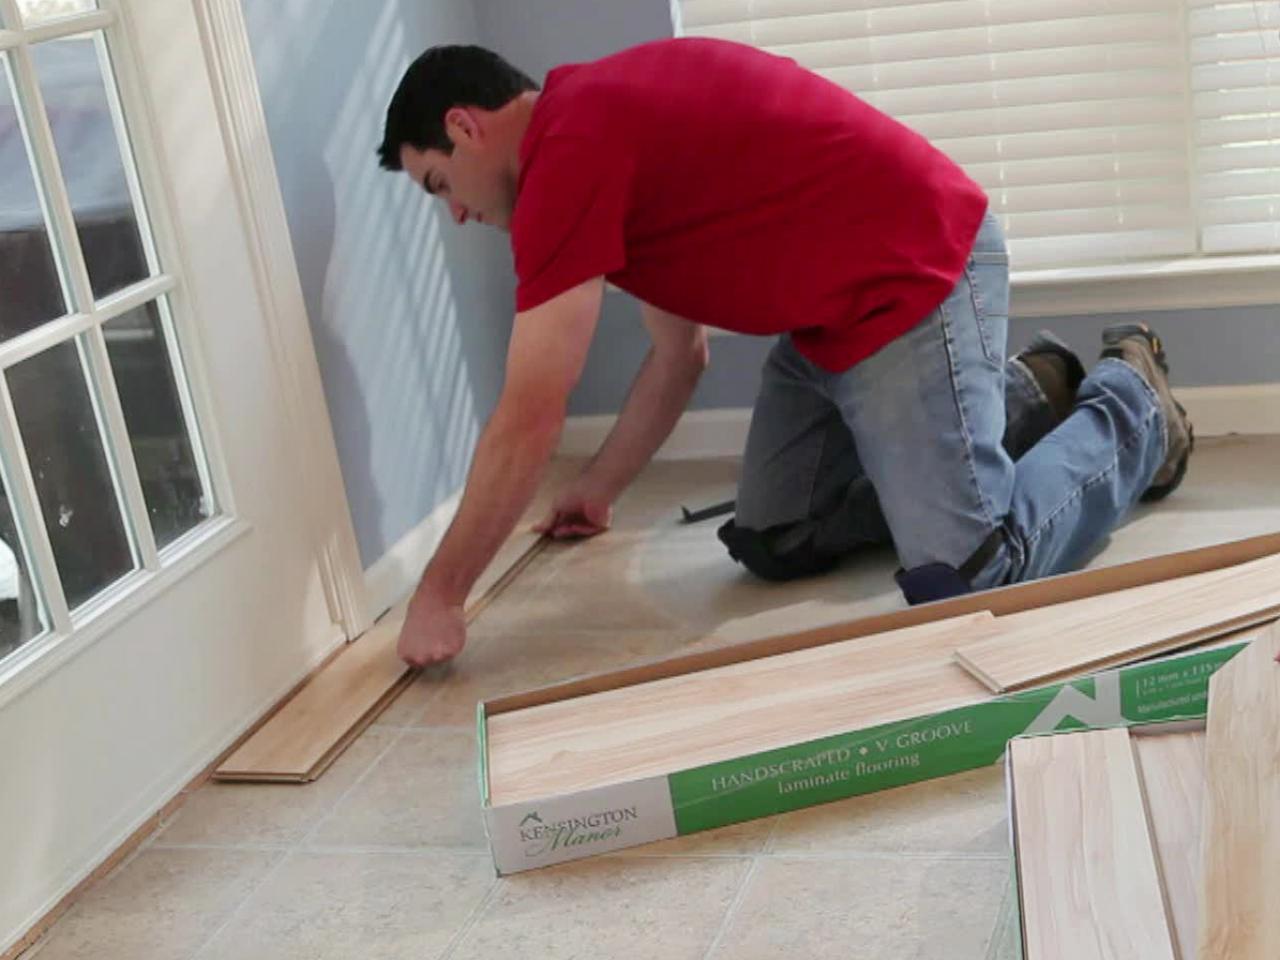 Installing Laminate Flooring How Tos, How To Install Laminate Flooring Over Concrete Floor